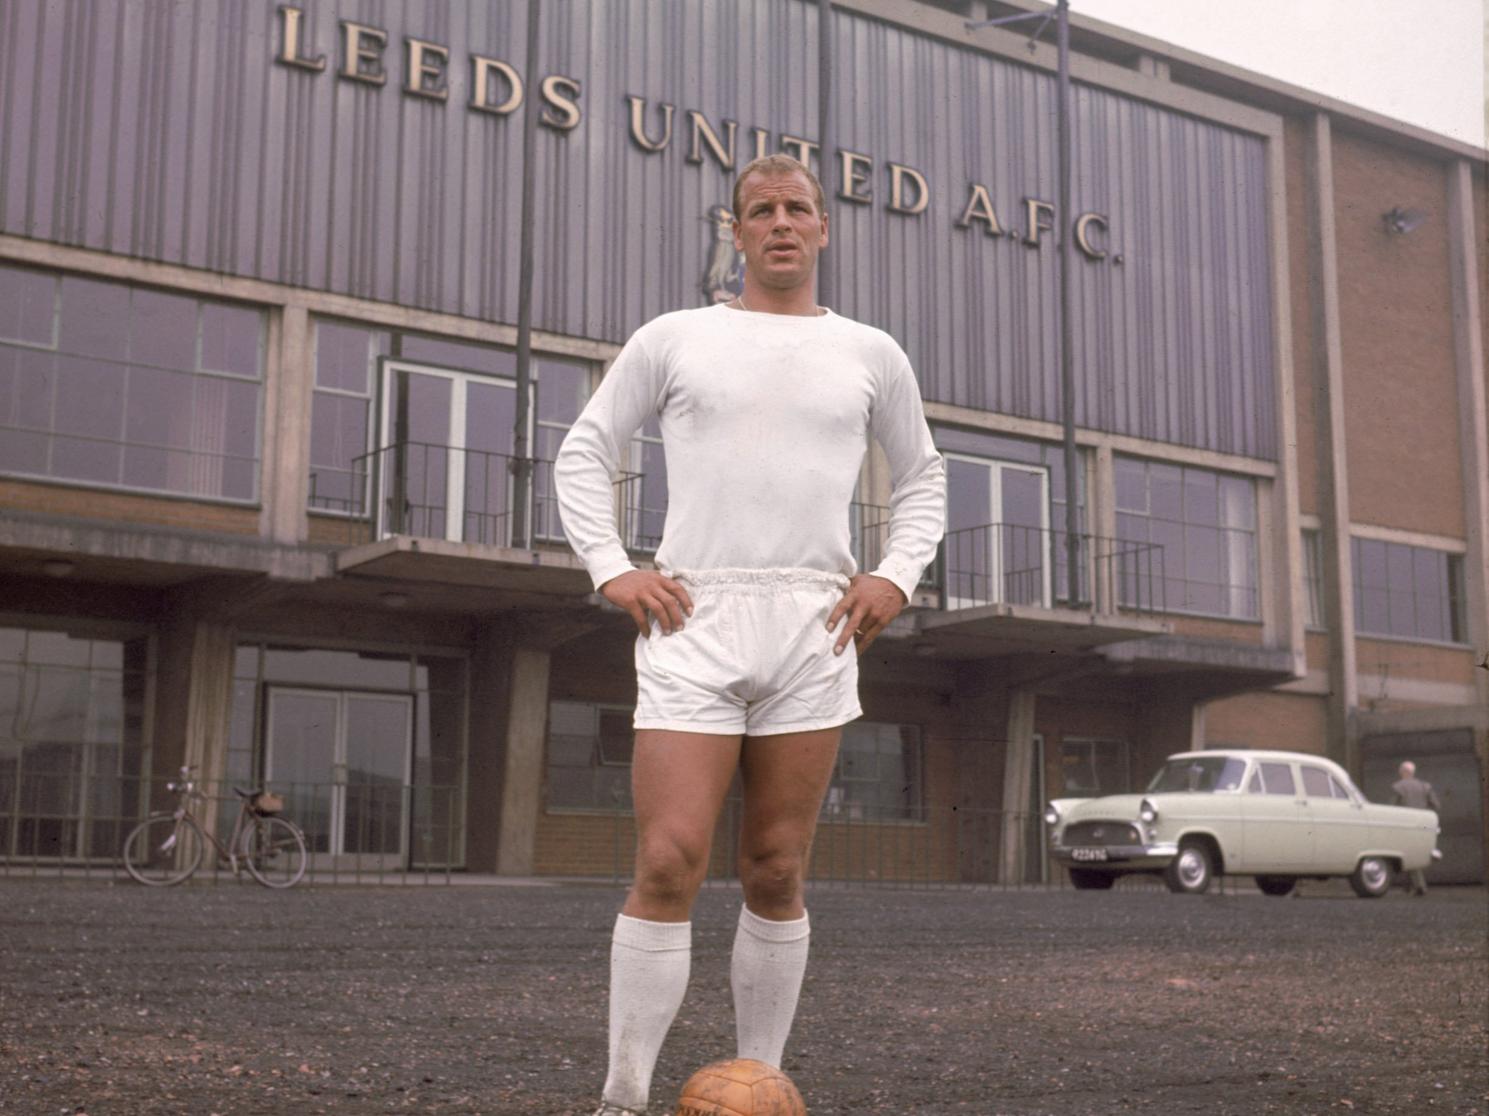 Remains the second highest all time goalscorer for Leeds. His influence on Leeds success during his final season was so strong, reporters nicknamed the club John Charles United'